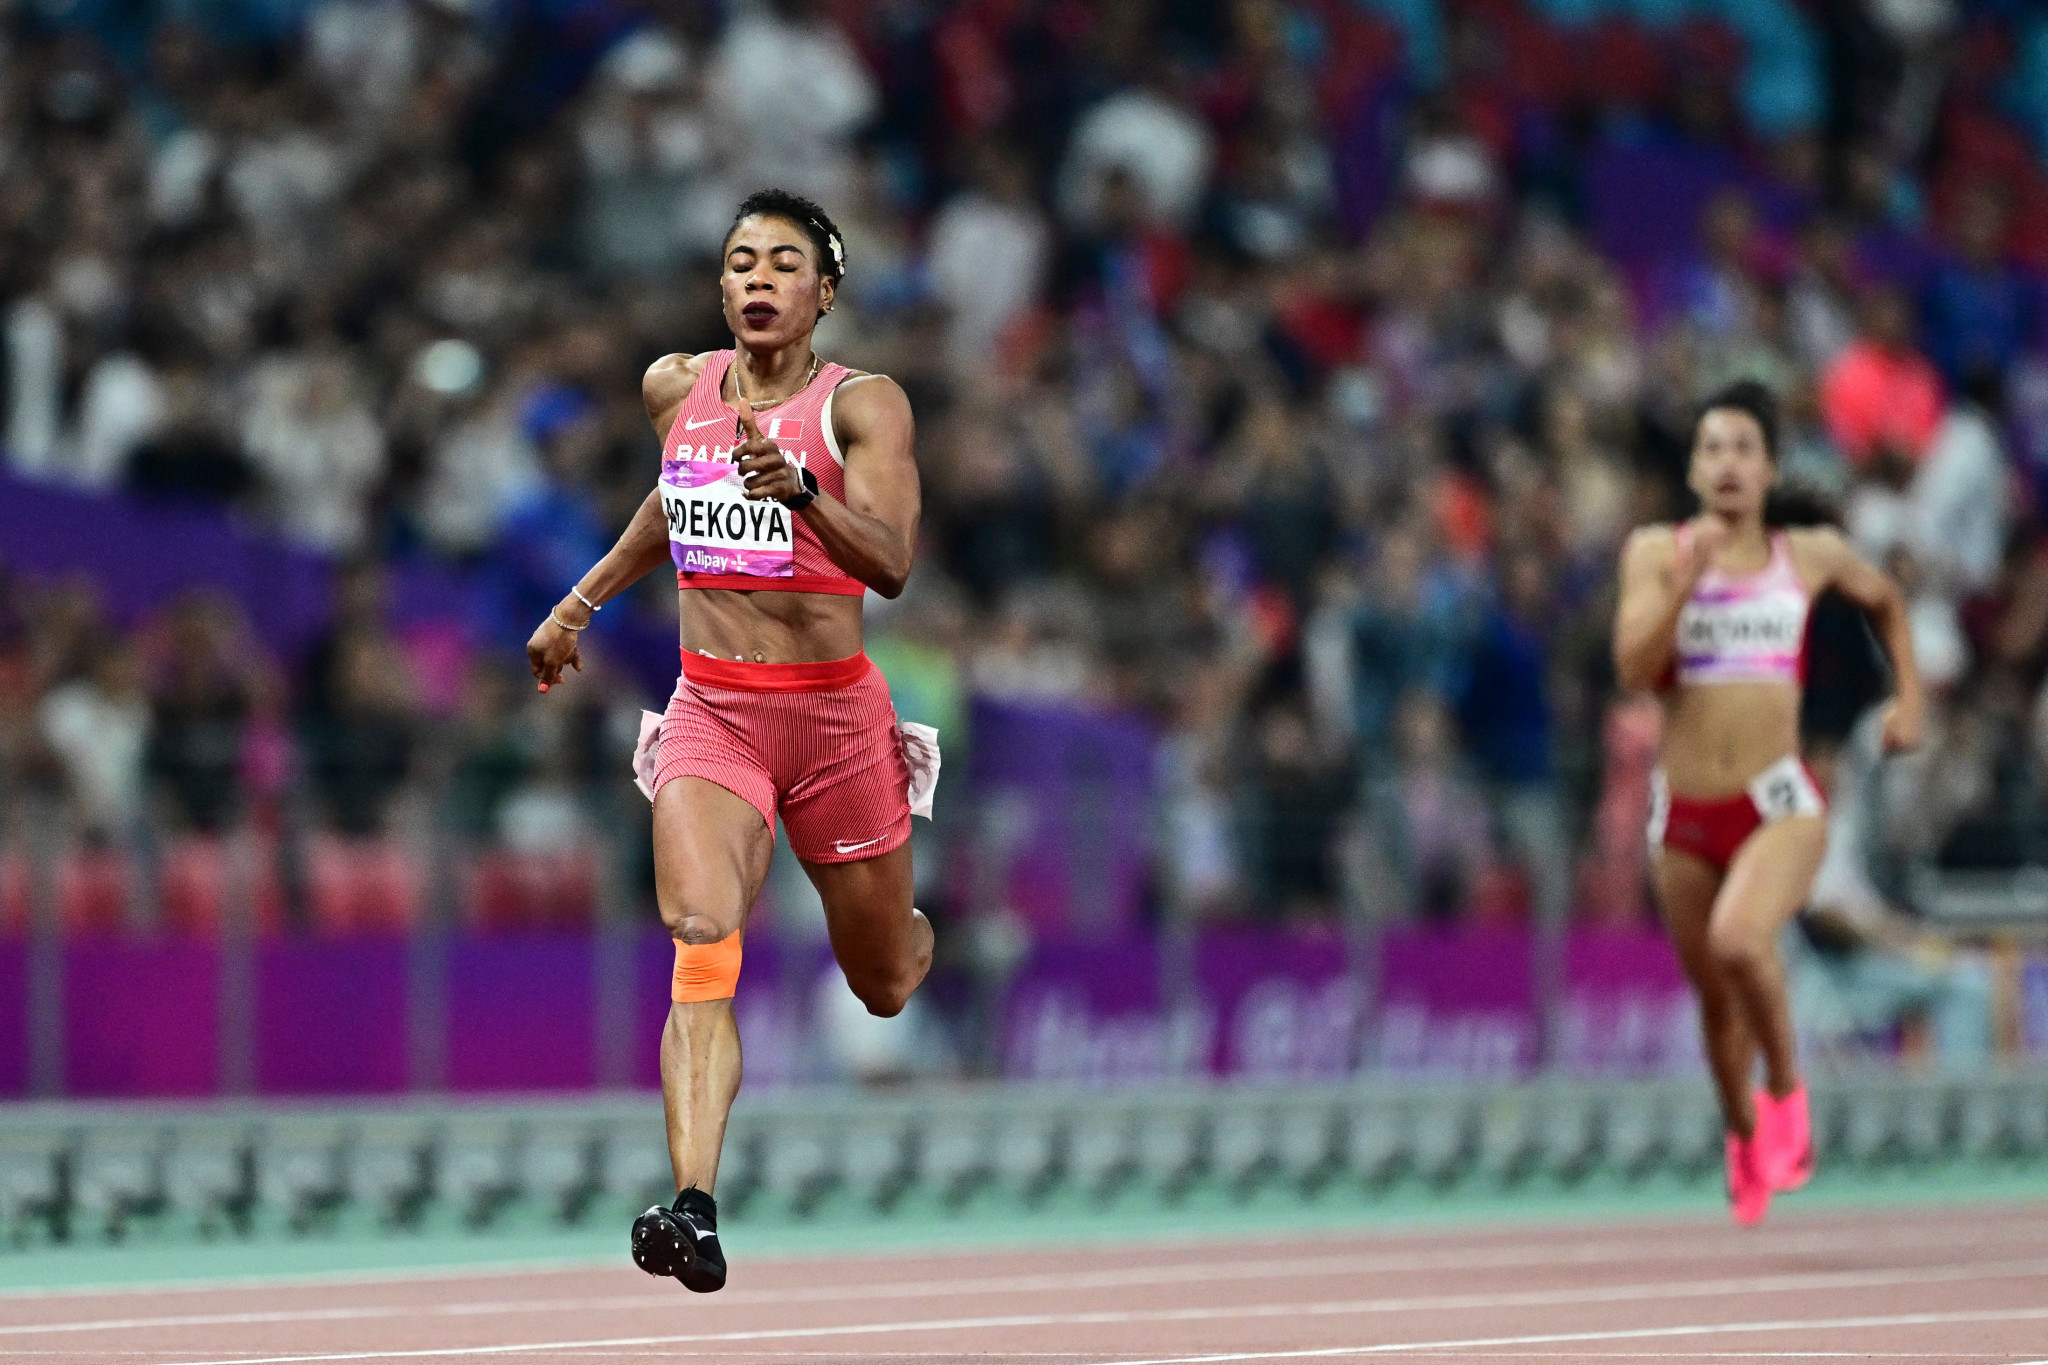 There was further athletics success in store for Bahrain as Kemi Adekoya, left, and Salwa Eid Naser completed a one-two in the women's 400m final ©Getty Images